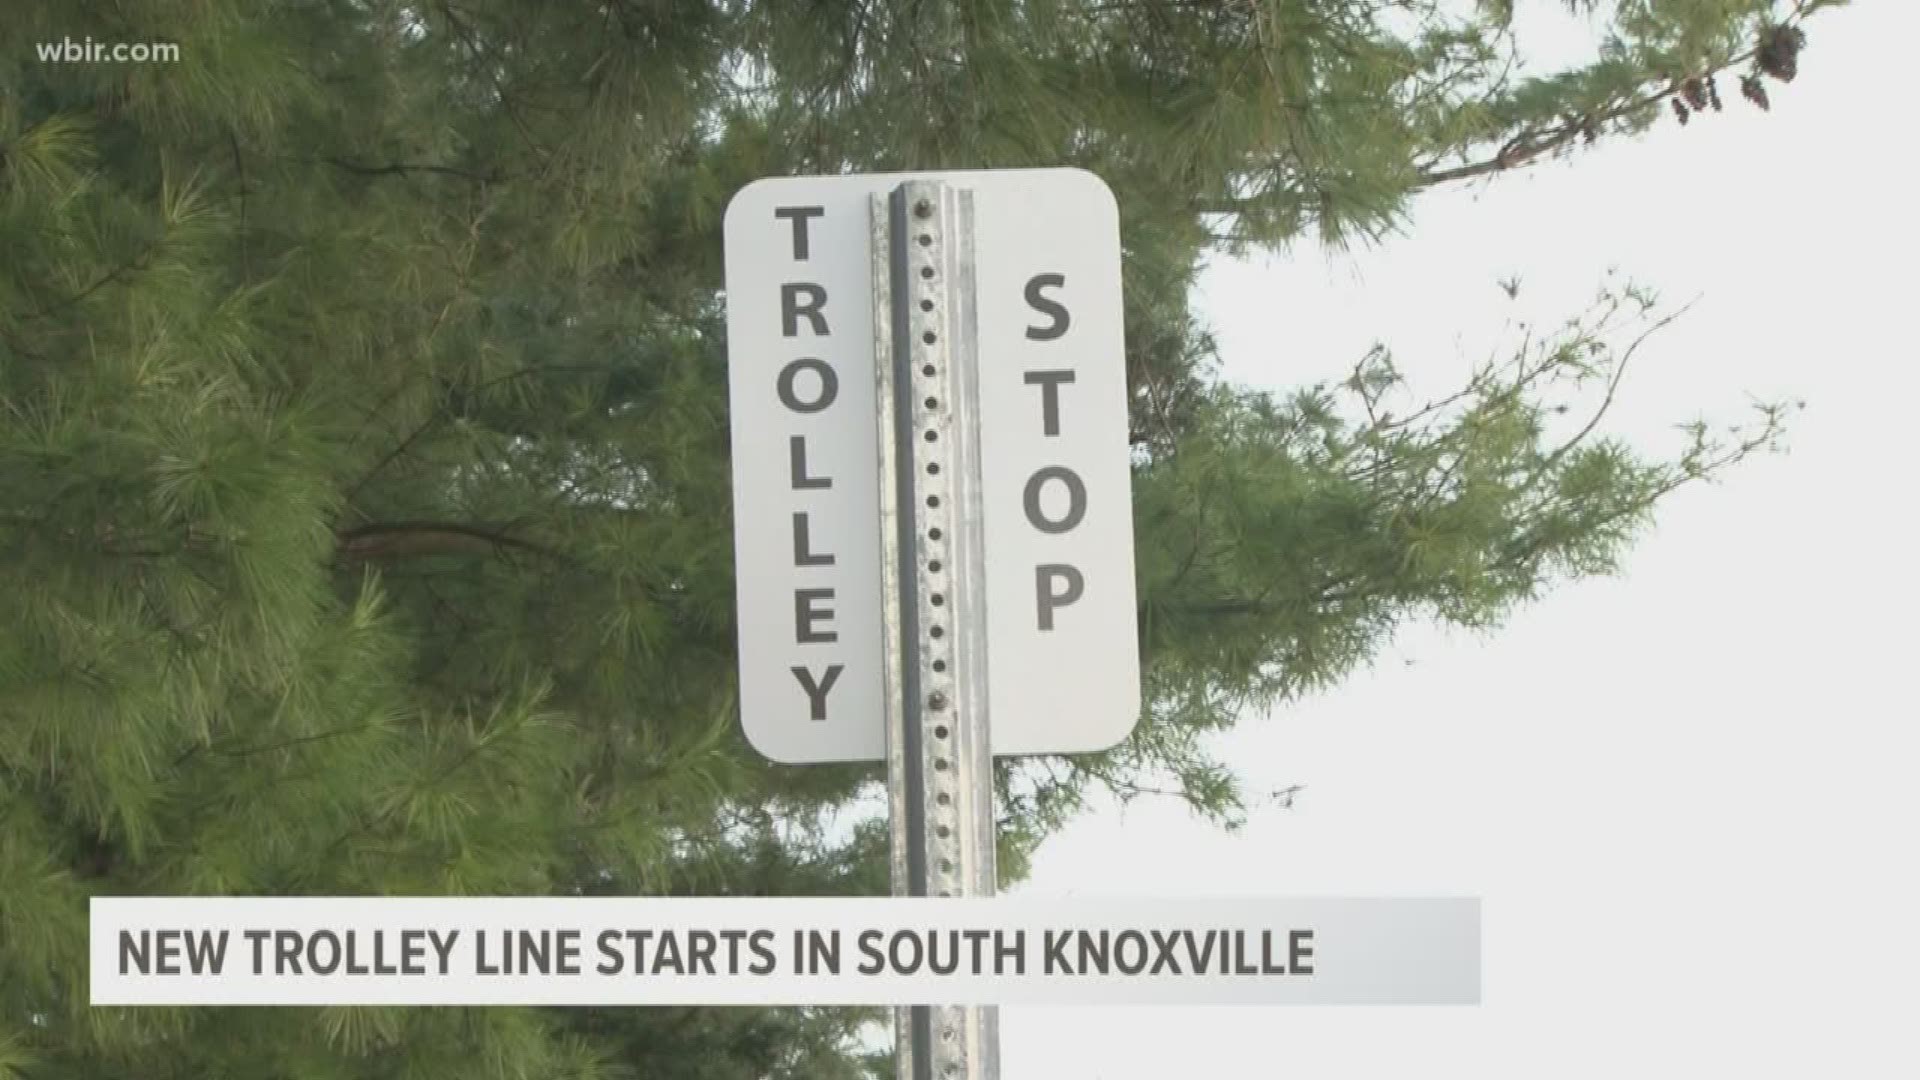 Starting today, residents and visitors to South Knoxville will have a new option to commute. 10News reporter Leslie Ackerson joins us in the studio with a look at a brand new trolley line the city is adding.